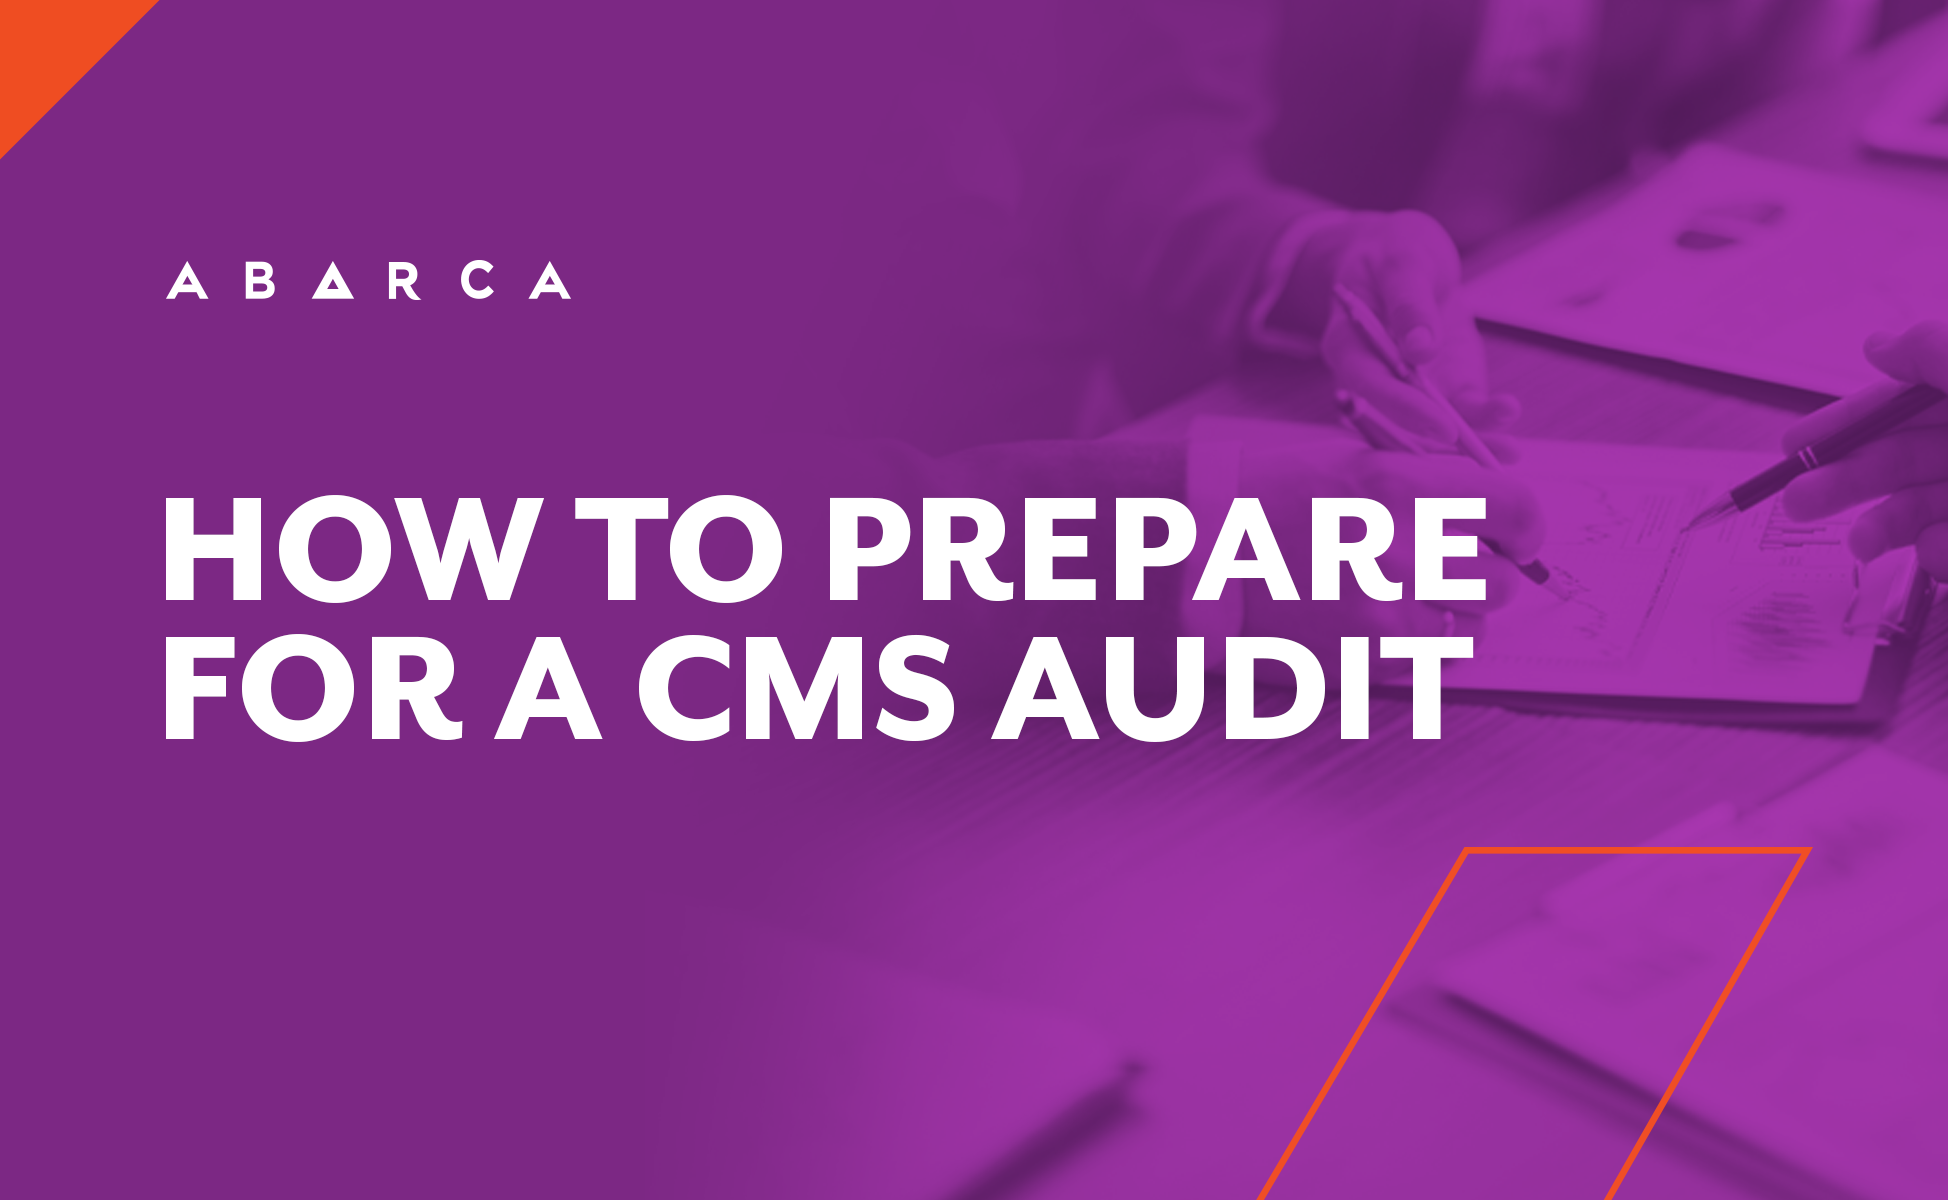 Abarca Health: How health plans can prepare for a CMS audit